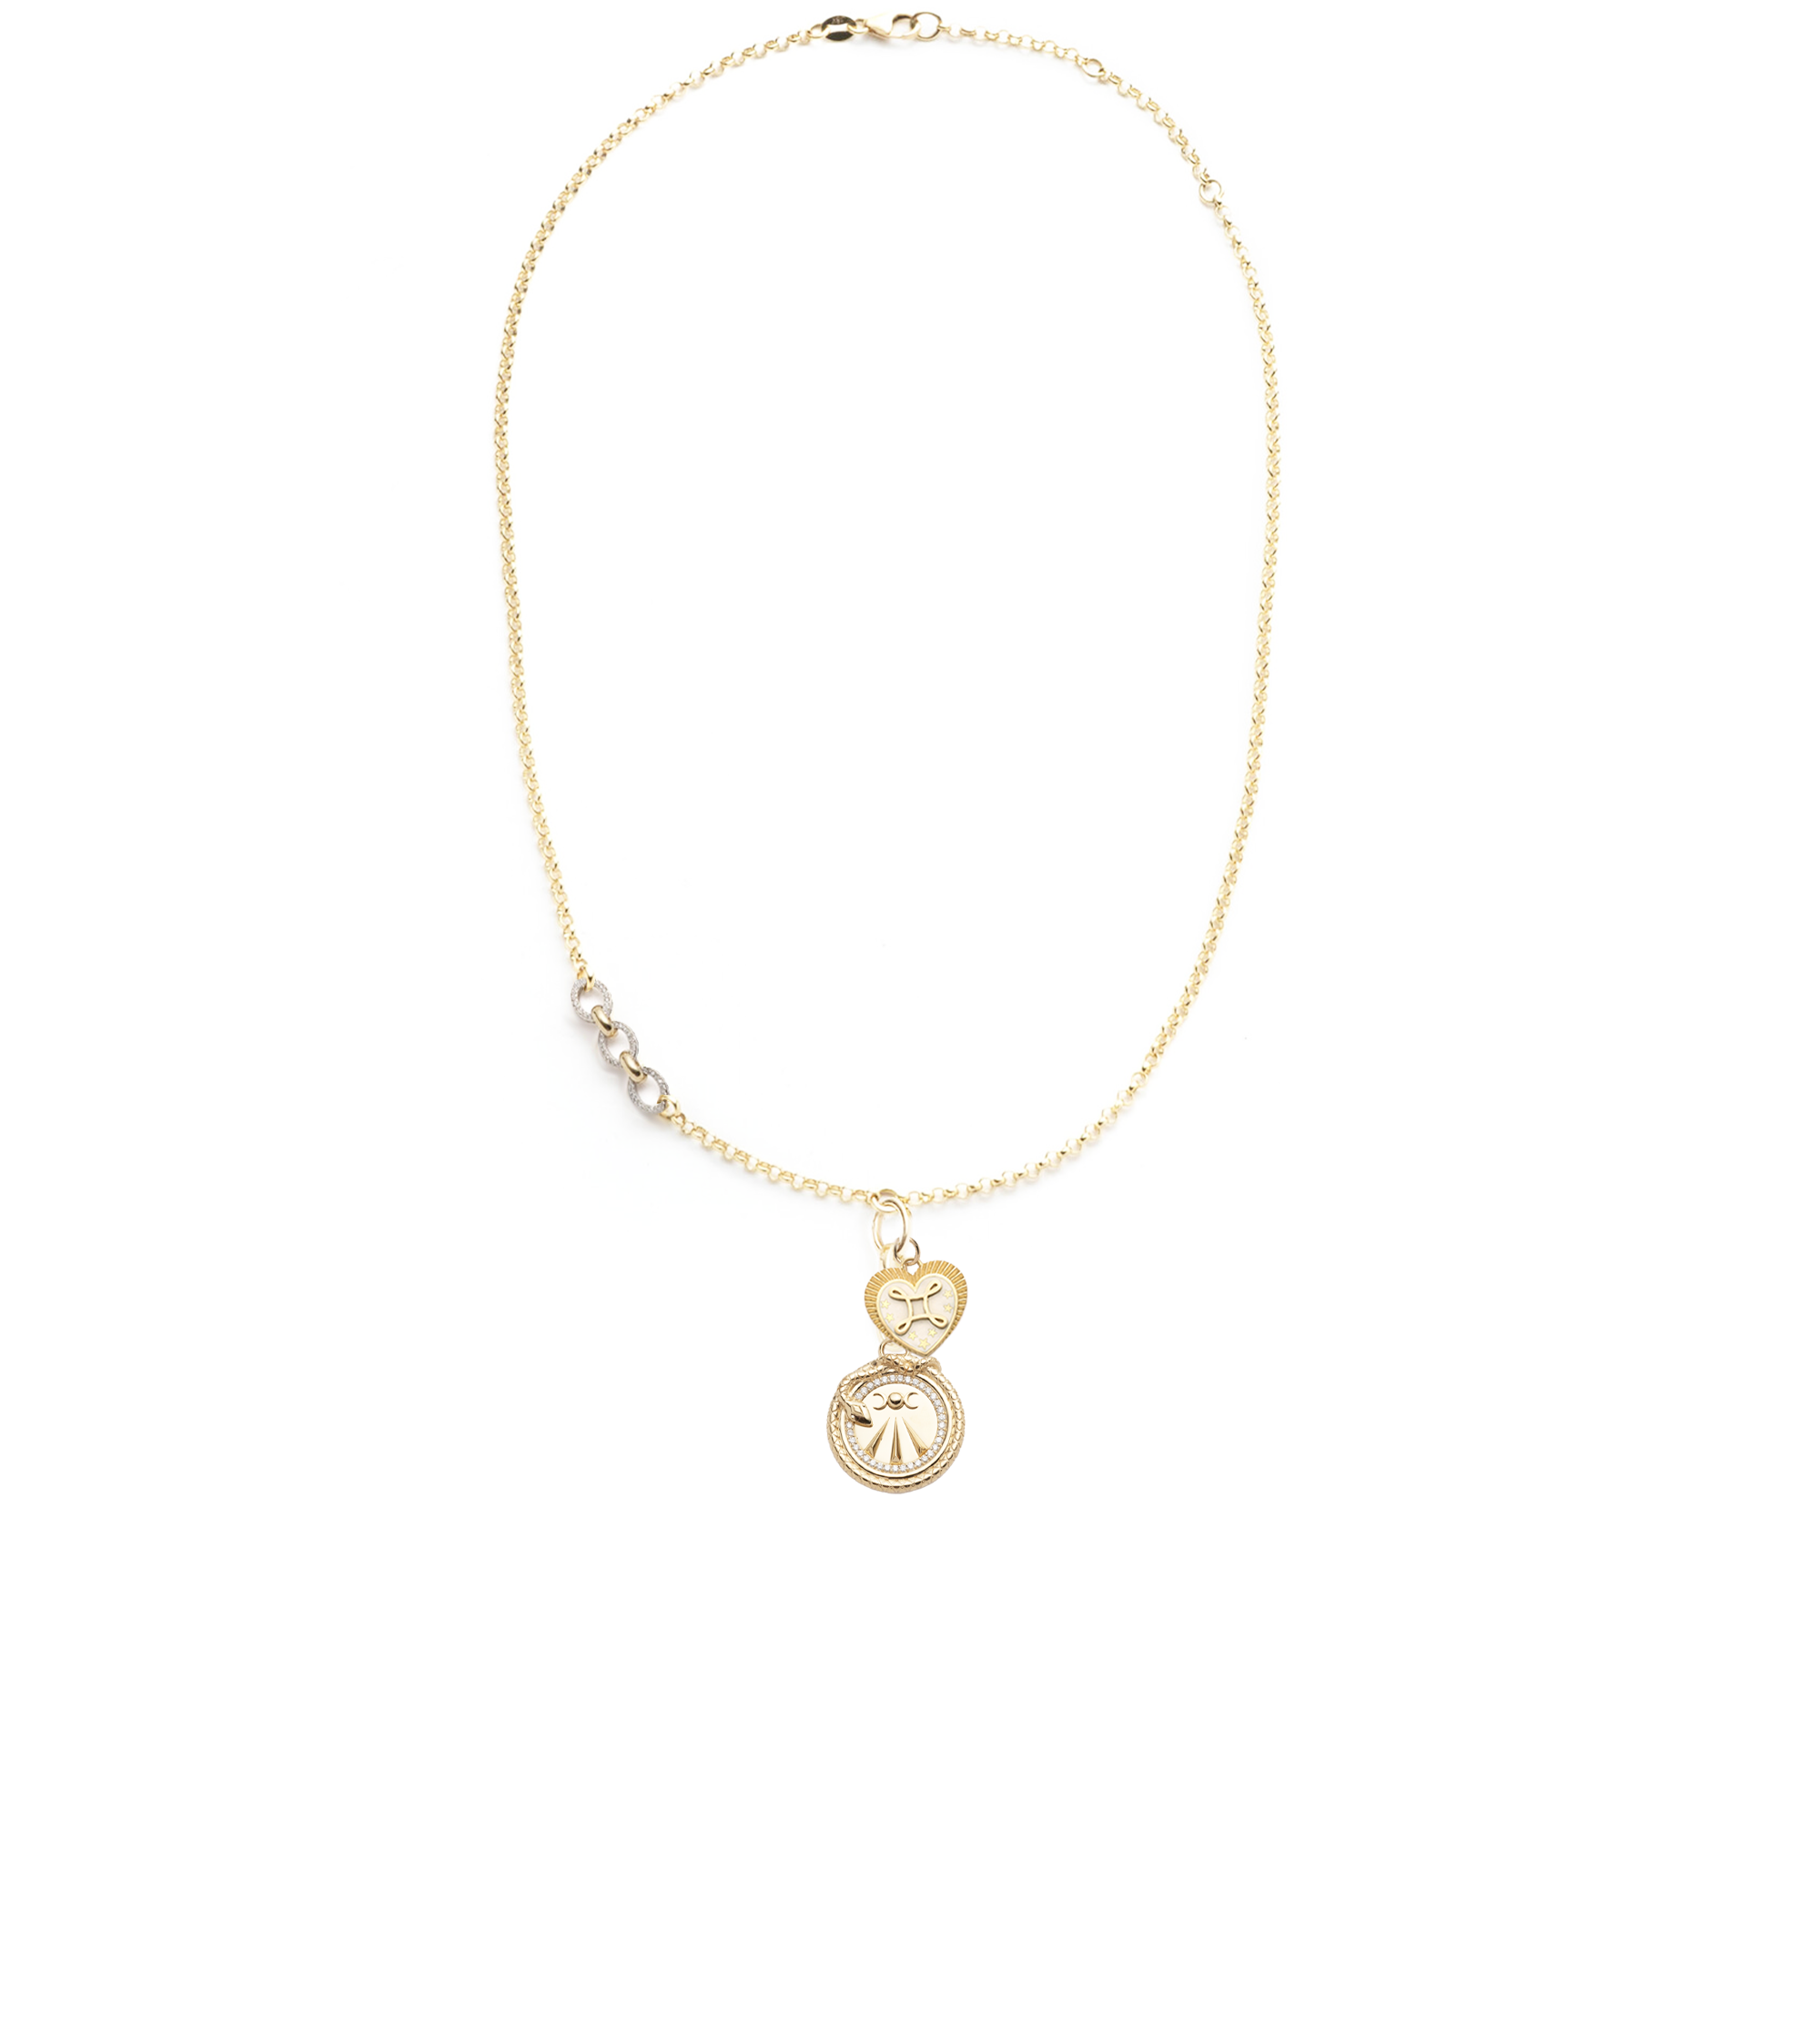 Wholeness & Love : Pave Small Belcher Flexible Extension Chain Necklace